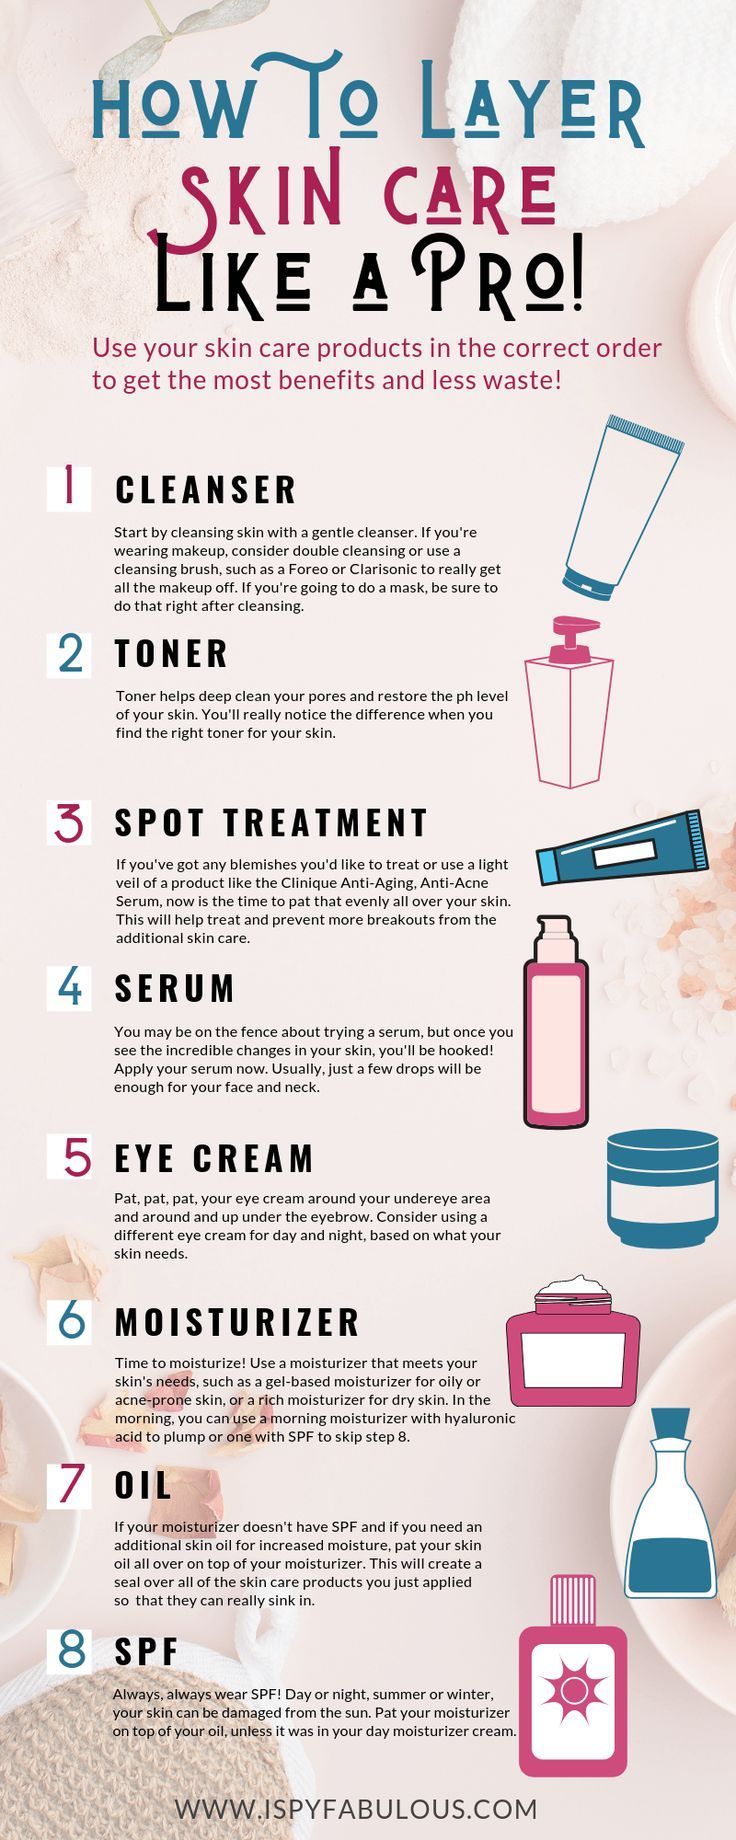 How To Layer Your Skincare Like a Pro! - I Spy Fabulous -   9 skin care Order makeup ideas